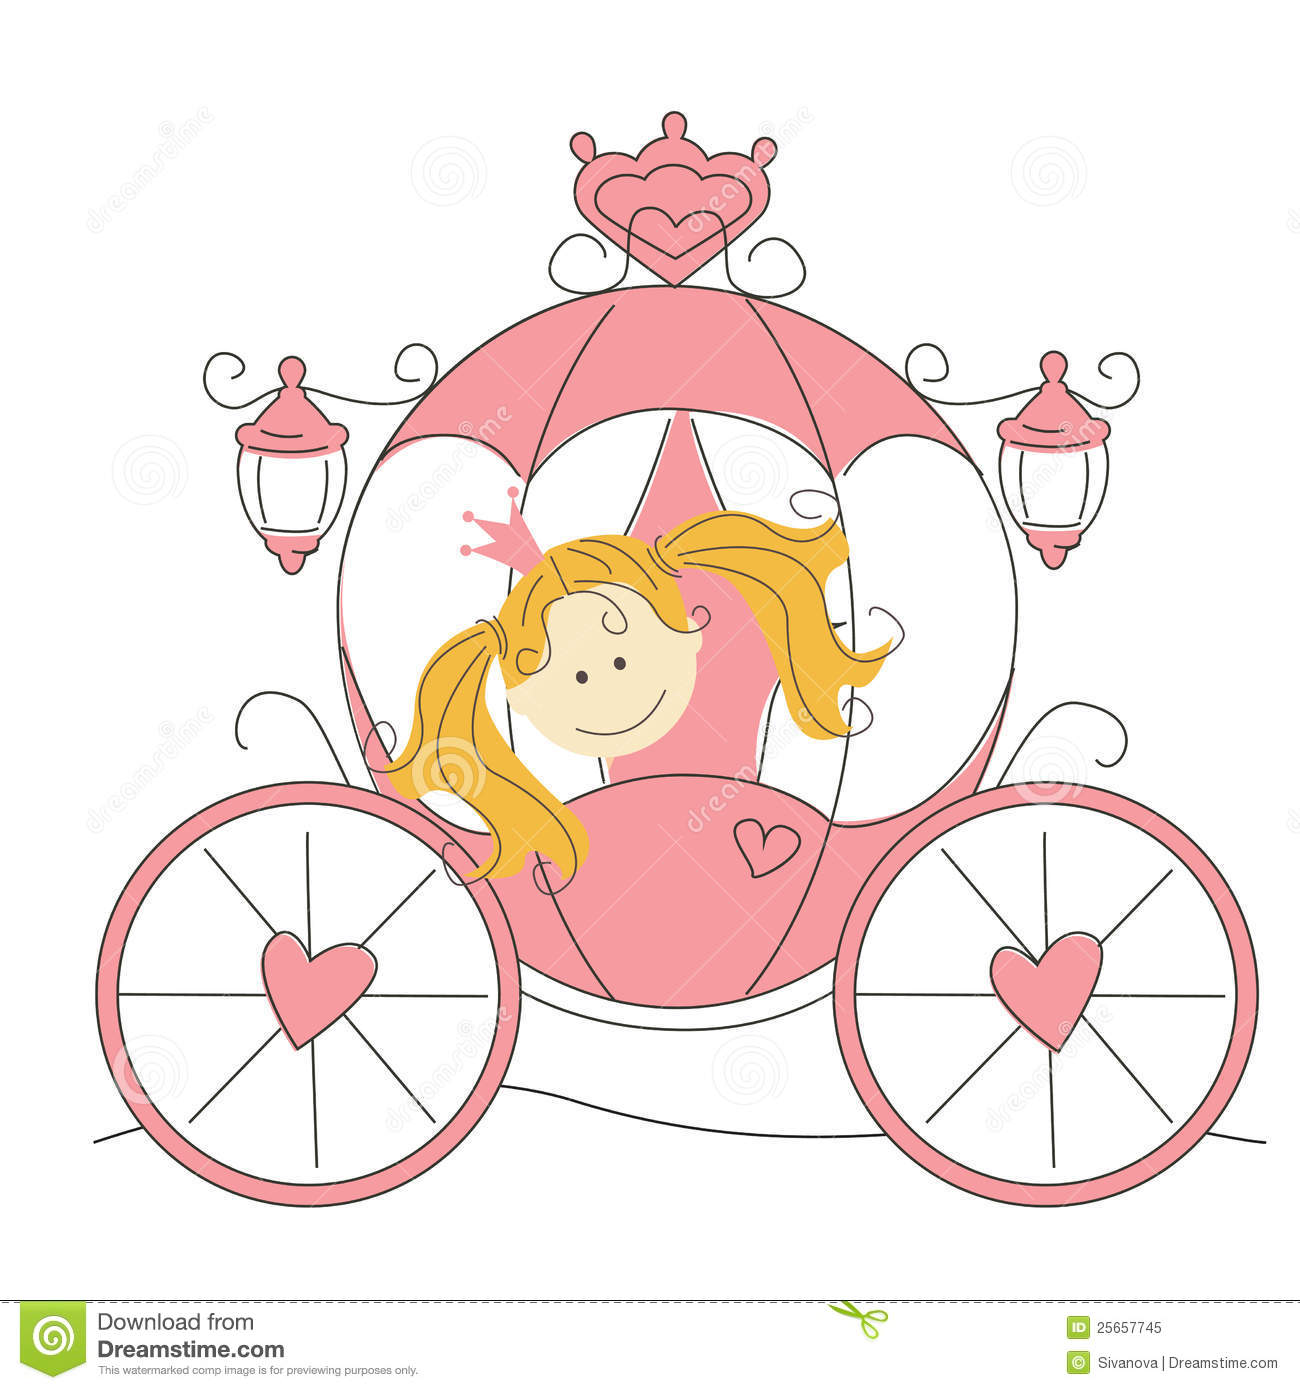 Cute Little Princess In The Carriage Royalty Free Stock Photo   Image